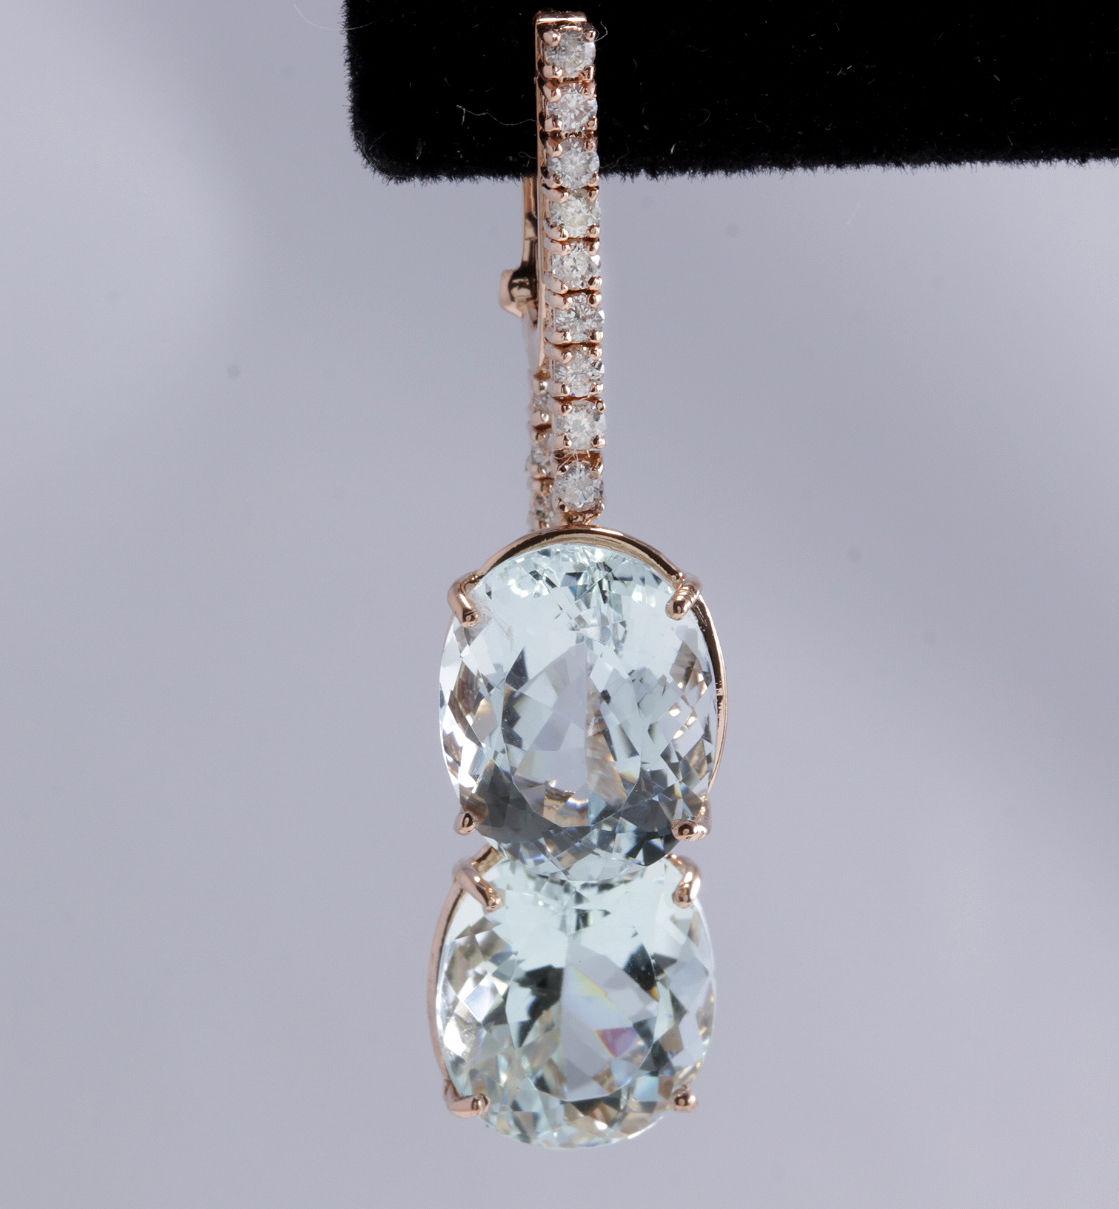 Exquisite 21.79 Carats Natural Aquamarine and Diamond 14K Solid Rose Gold Earrings

Amazing looking piece!

Total Natural Round Cut White Diamonds Weight: .85 Carats (color F-G / Clarity SI1-SI2)

Total Natural Oval Cut Blue Aquamarines Weight is: